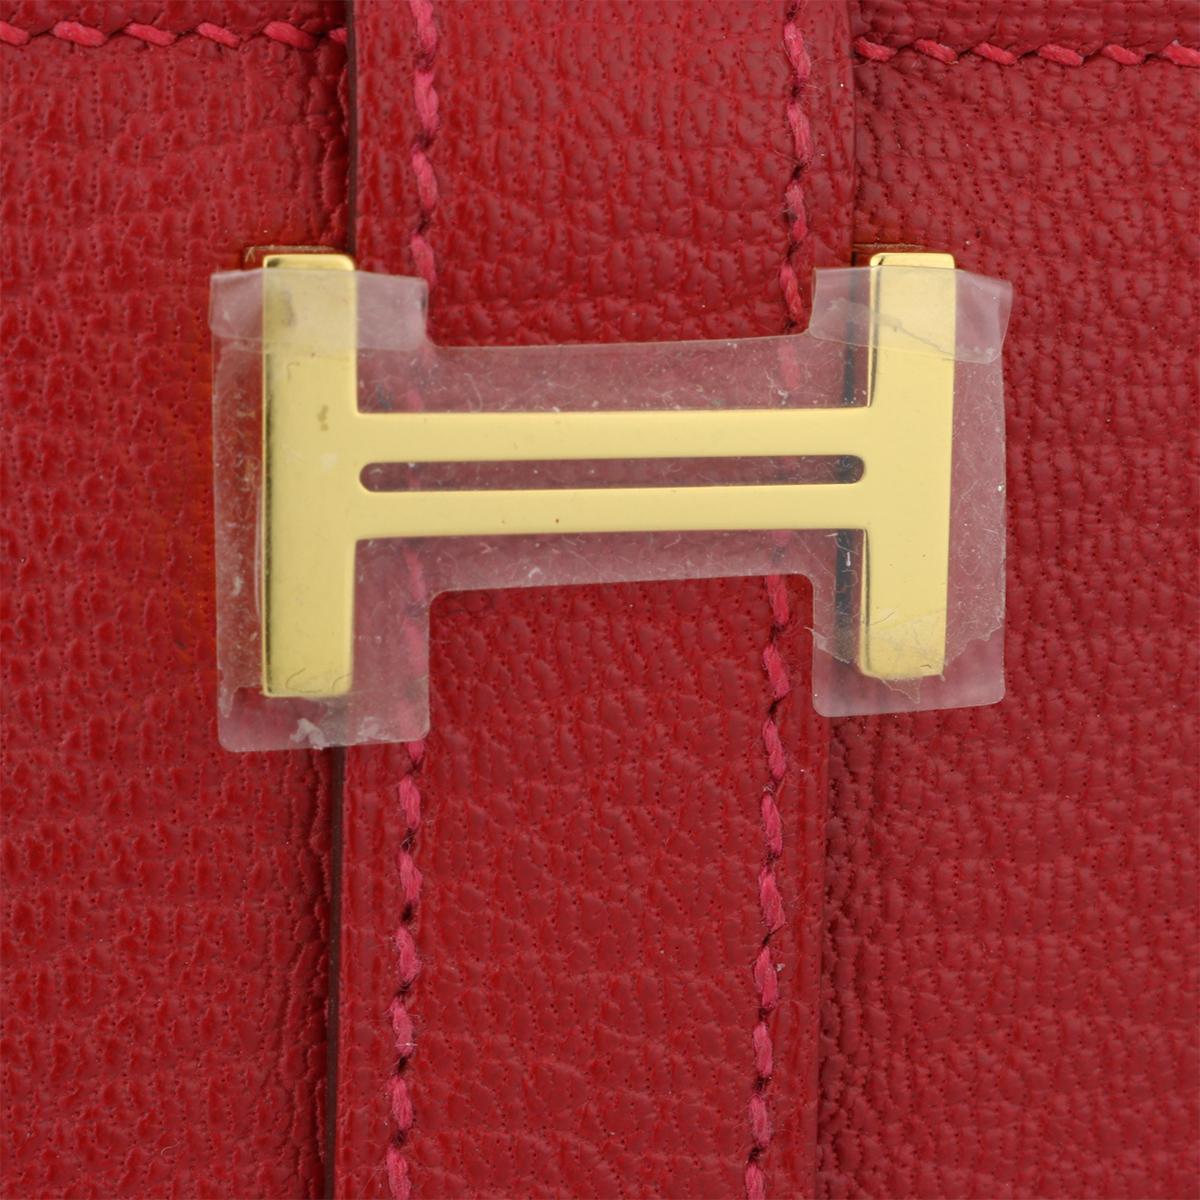 Authentic Hermès Bearn Wallet Q5 Rouge Casaque Goatskin with Gold Hardware Stamp Q 2013.

This stunning Bearn wallet is in pristine-brand new condition, the wallet still holds its original shape, and the hardware is still very shiny.

Exterior